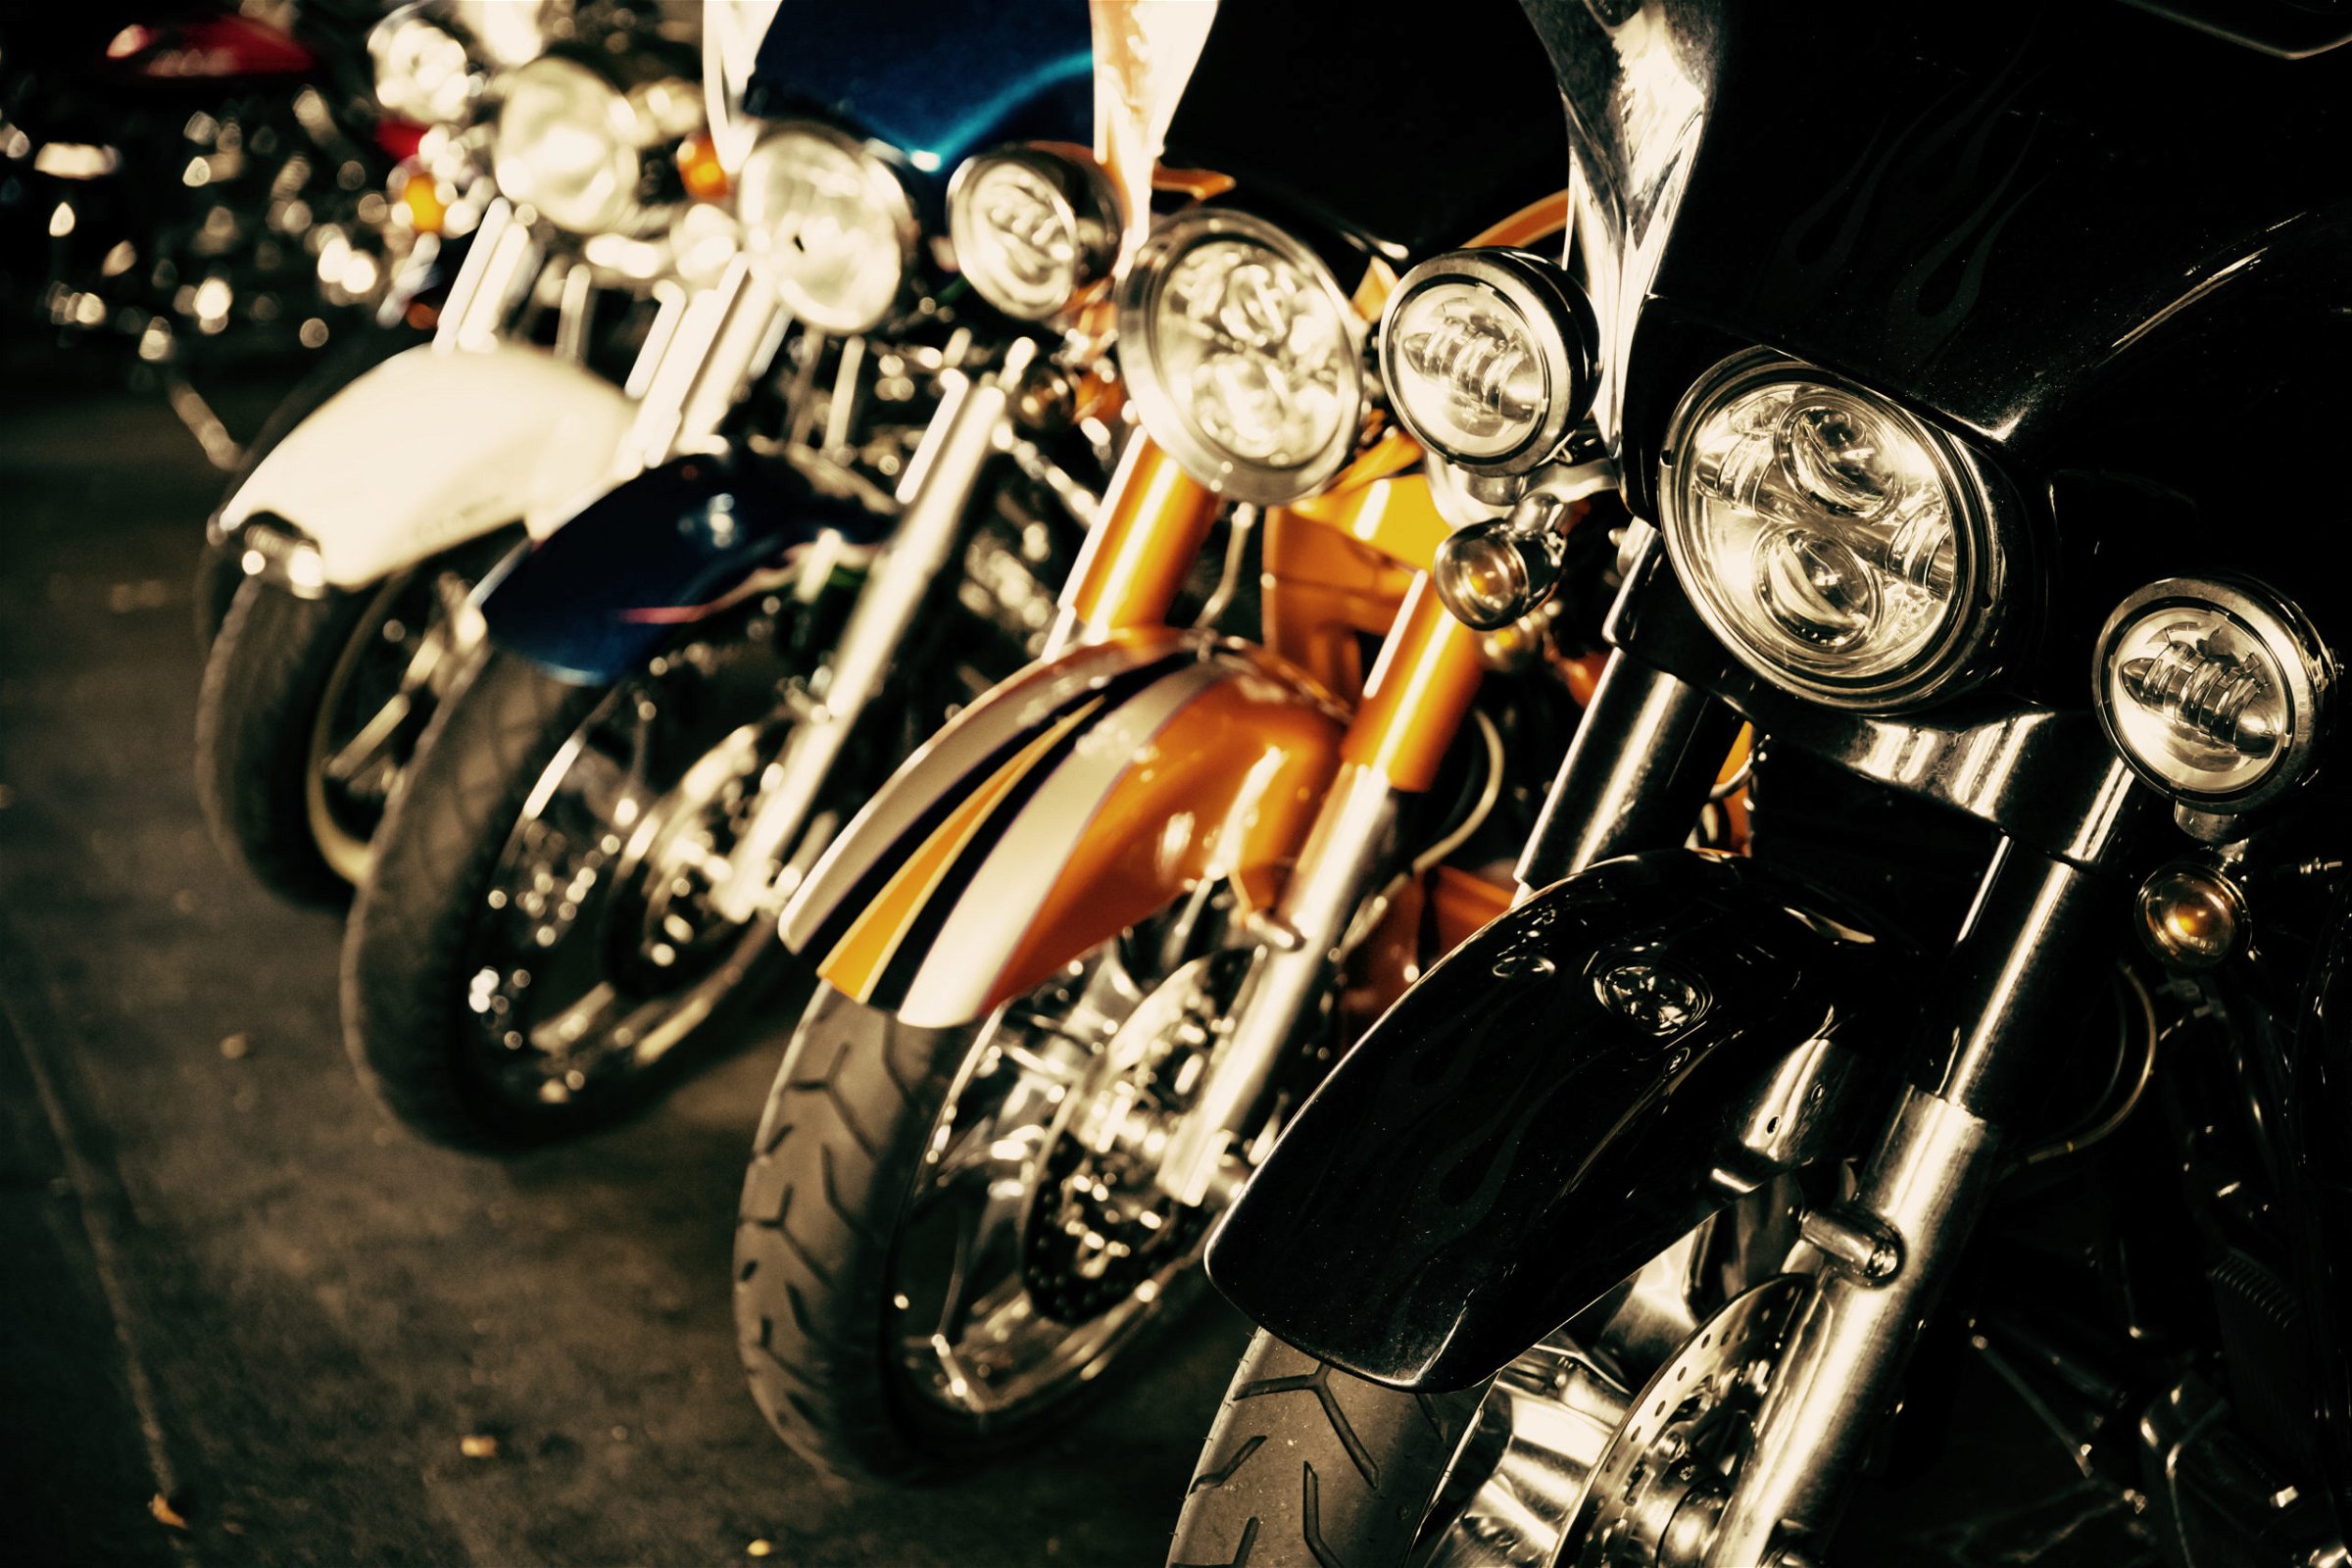 If you’re injured in a motorcycle accident during Myrtle Beach Bike Week, talk to an experienced South Carolina motorcycle accident lawyer immediately.